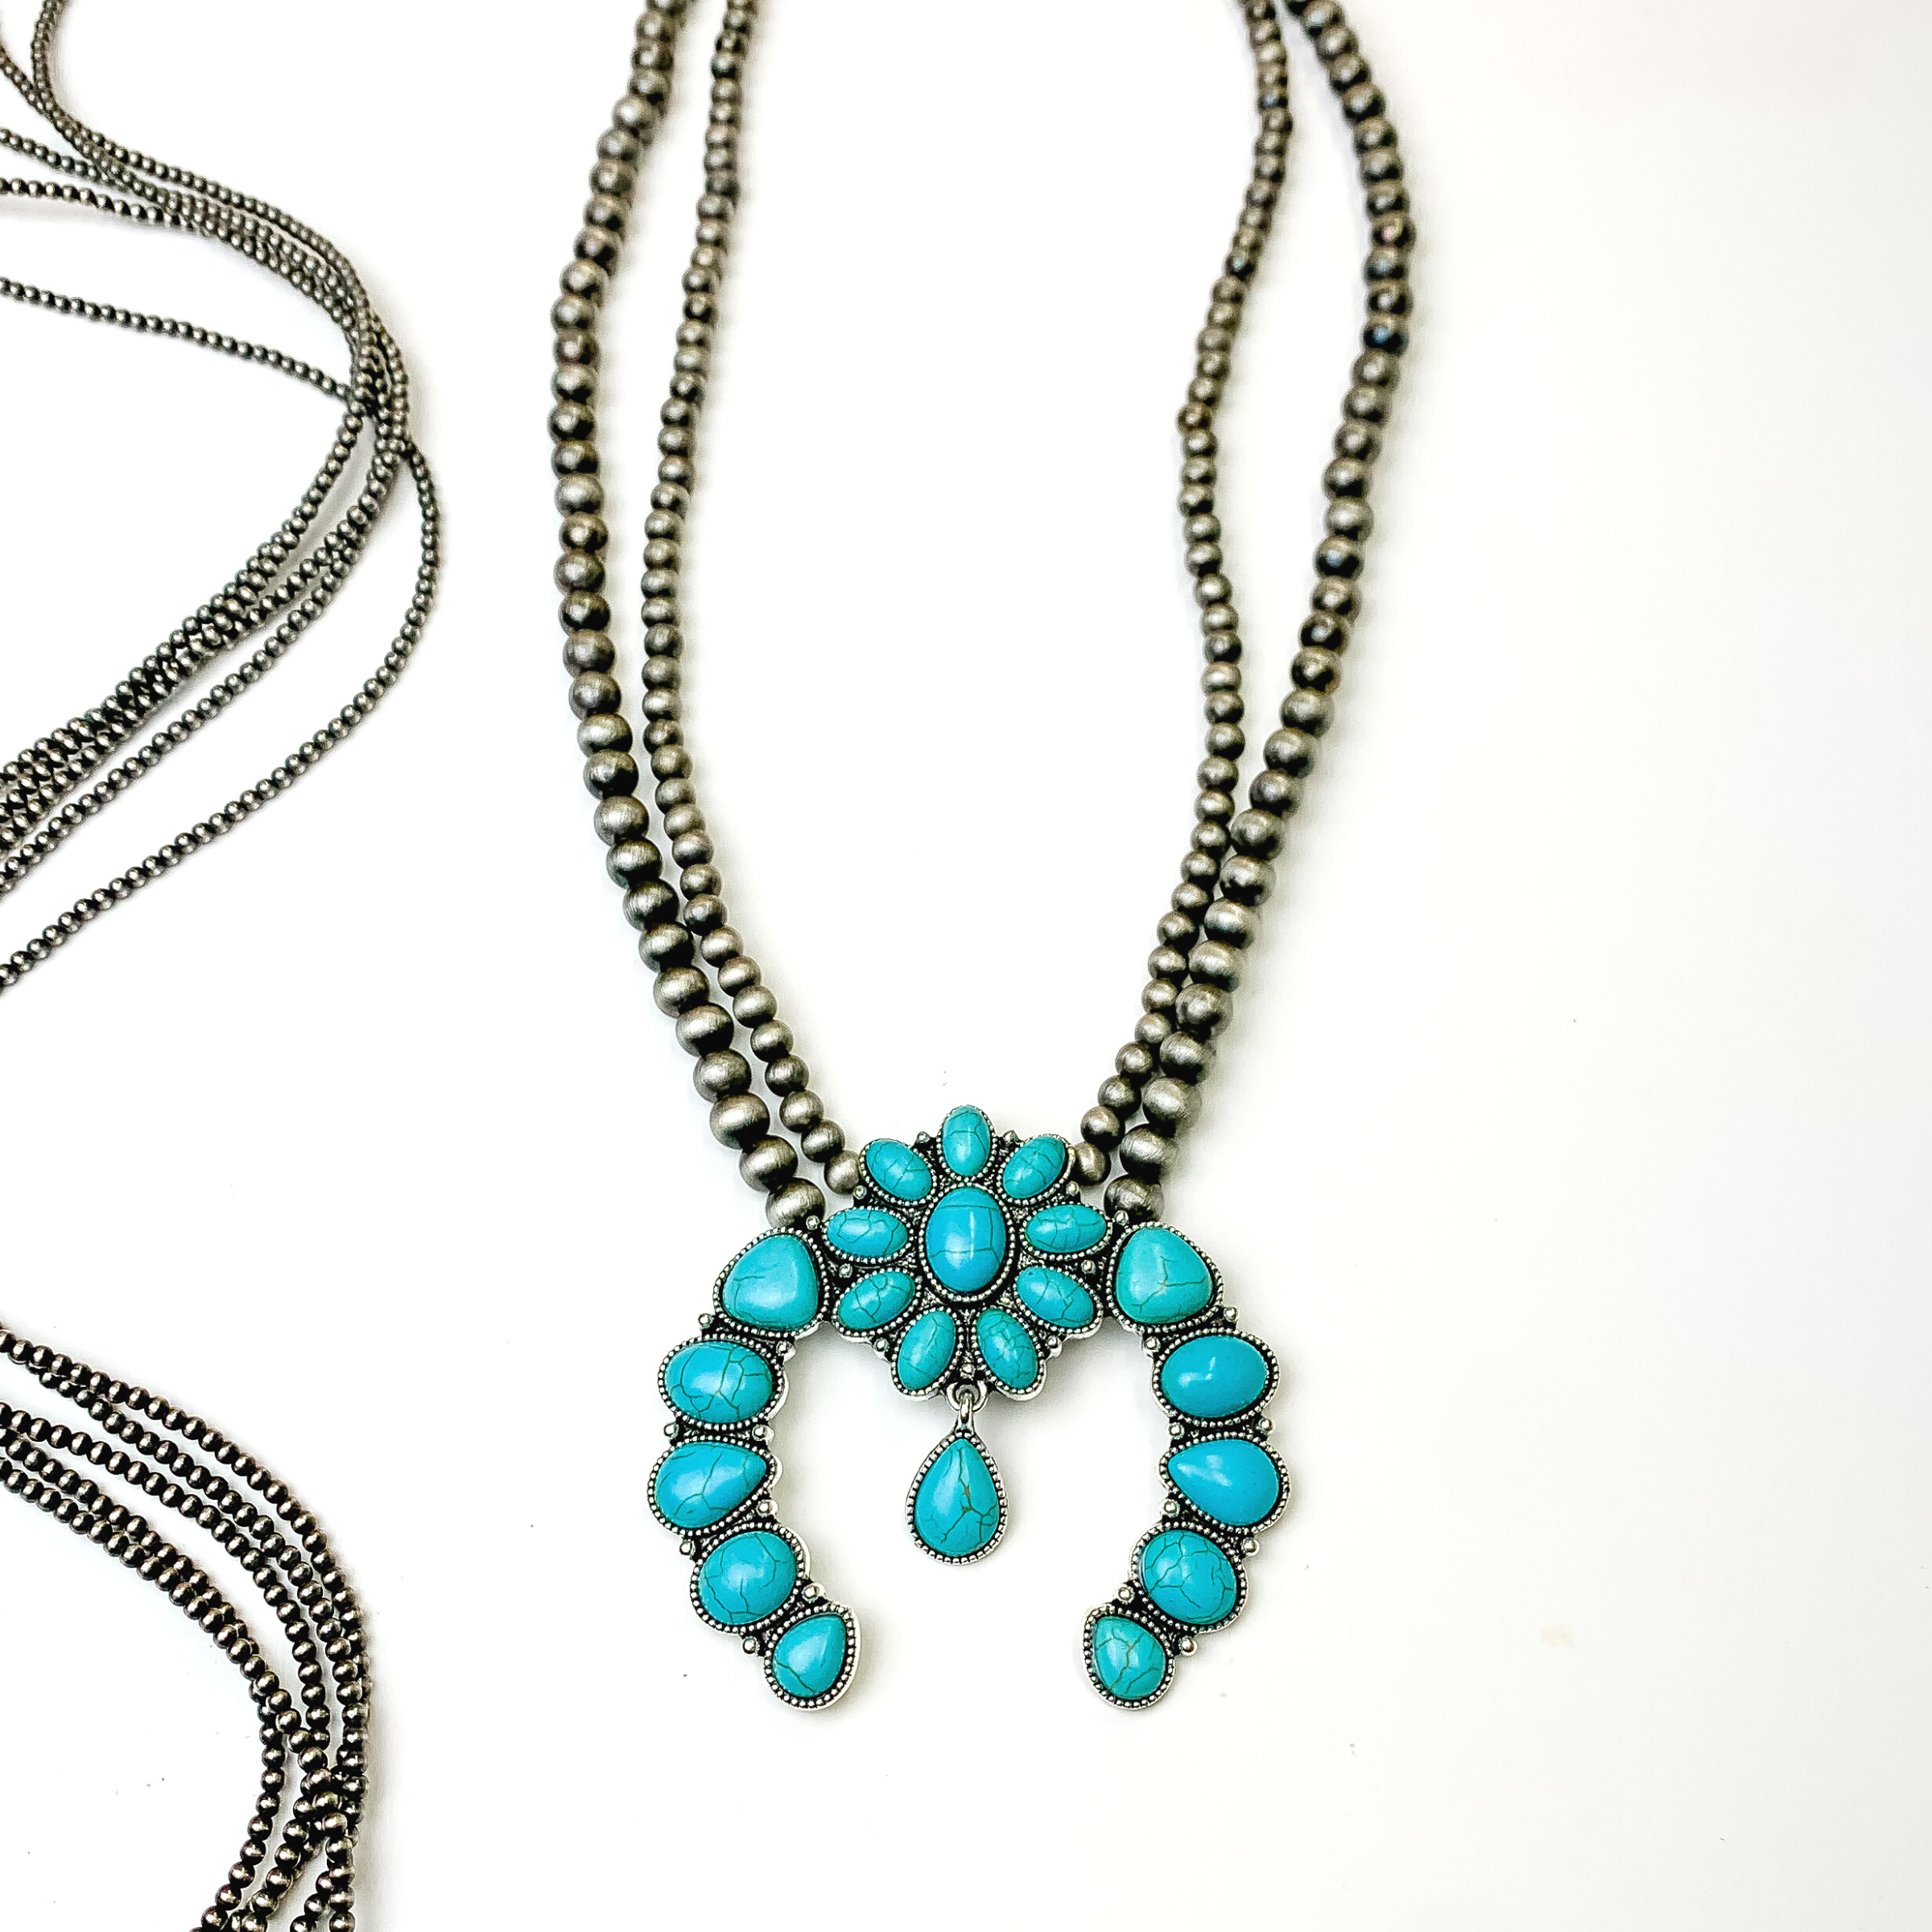 Double stran silver beaded necklace with a turquoise stone naja pendant. This necklace is pictured on a white background with silver beads on the left side of the picture.